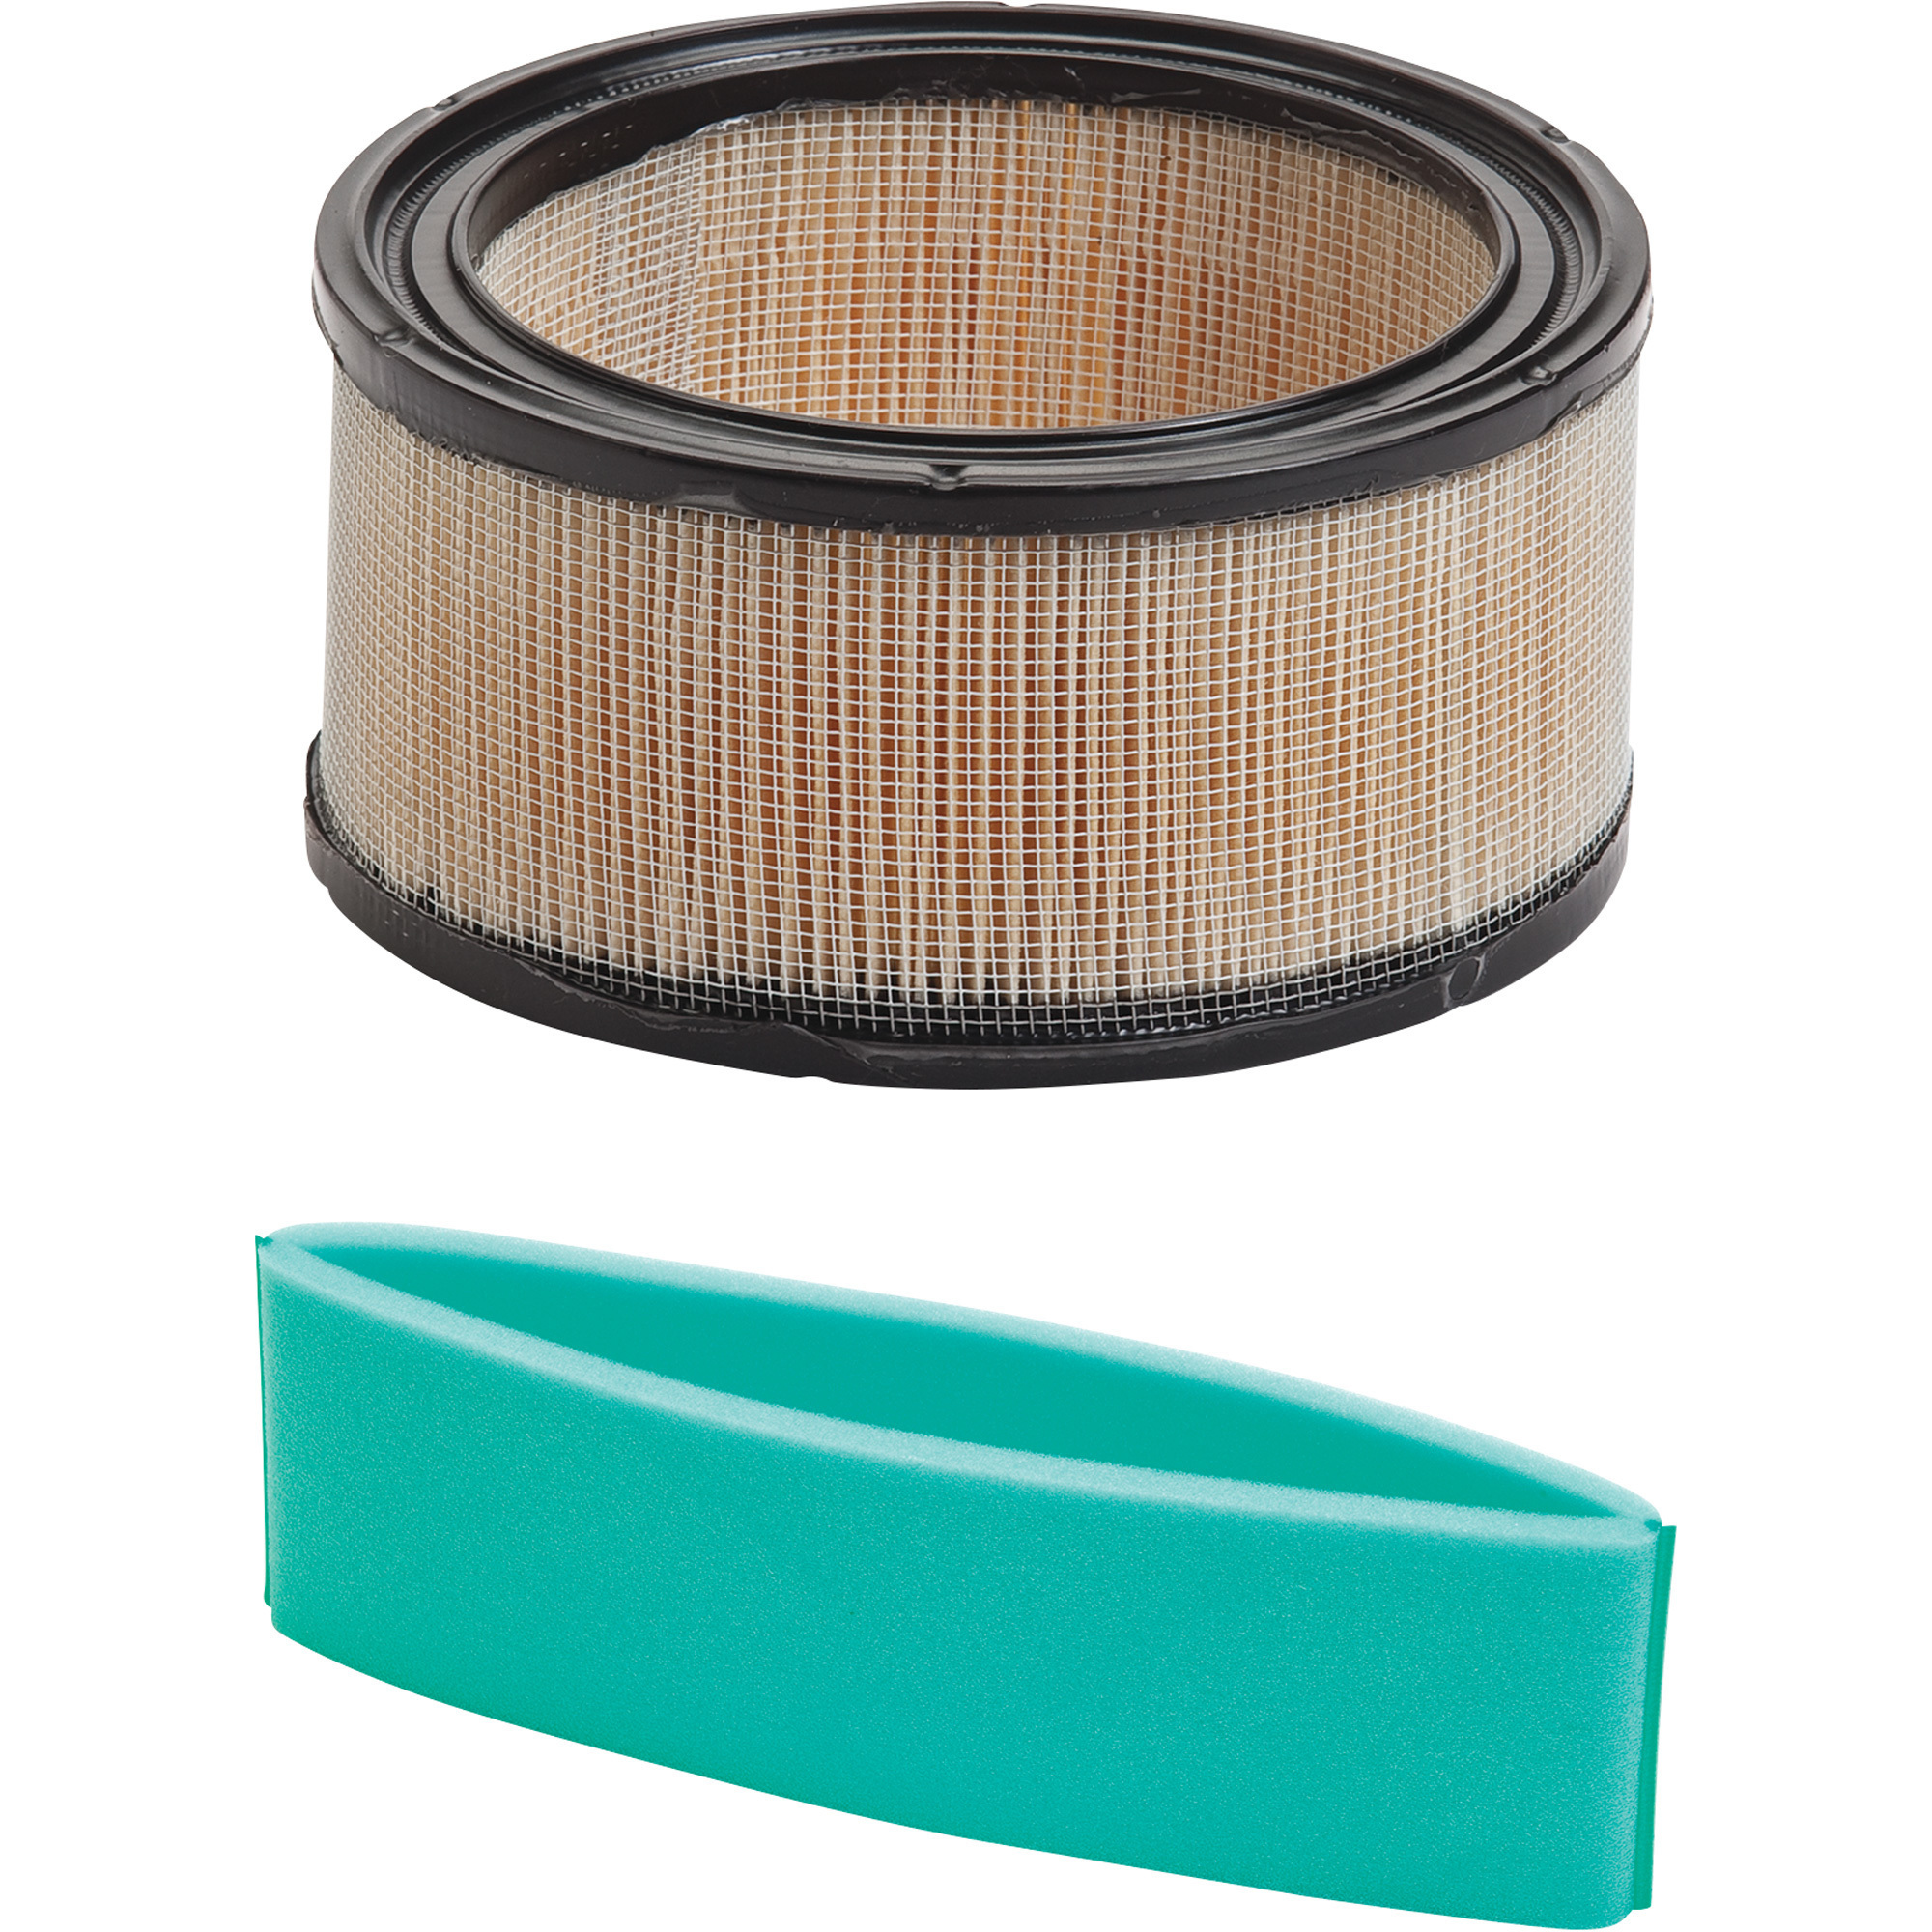 Oregon Air Filter and Pre-Cleaner Kit, Replacement for Kohler OEM Part# 45 883 02-S1, Model 30-093CSK